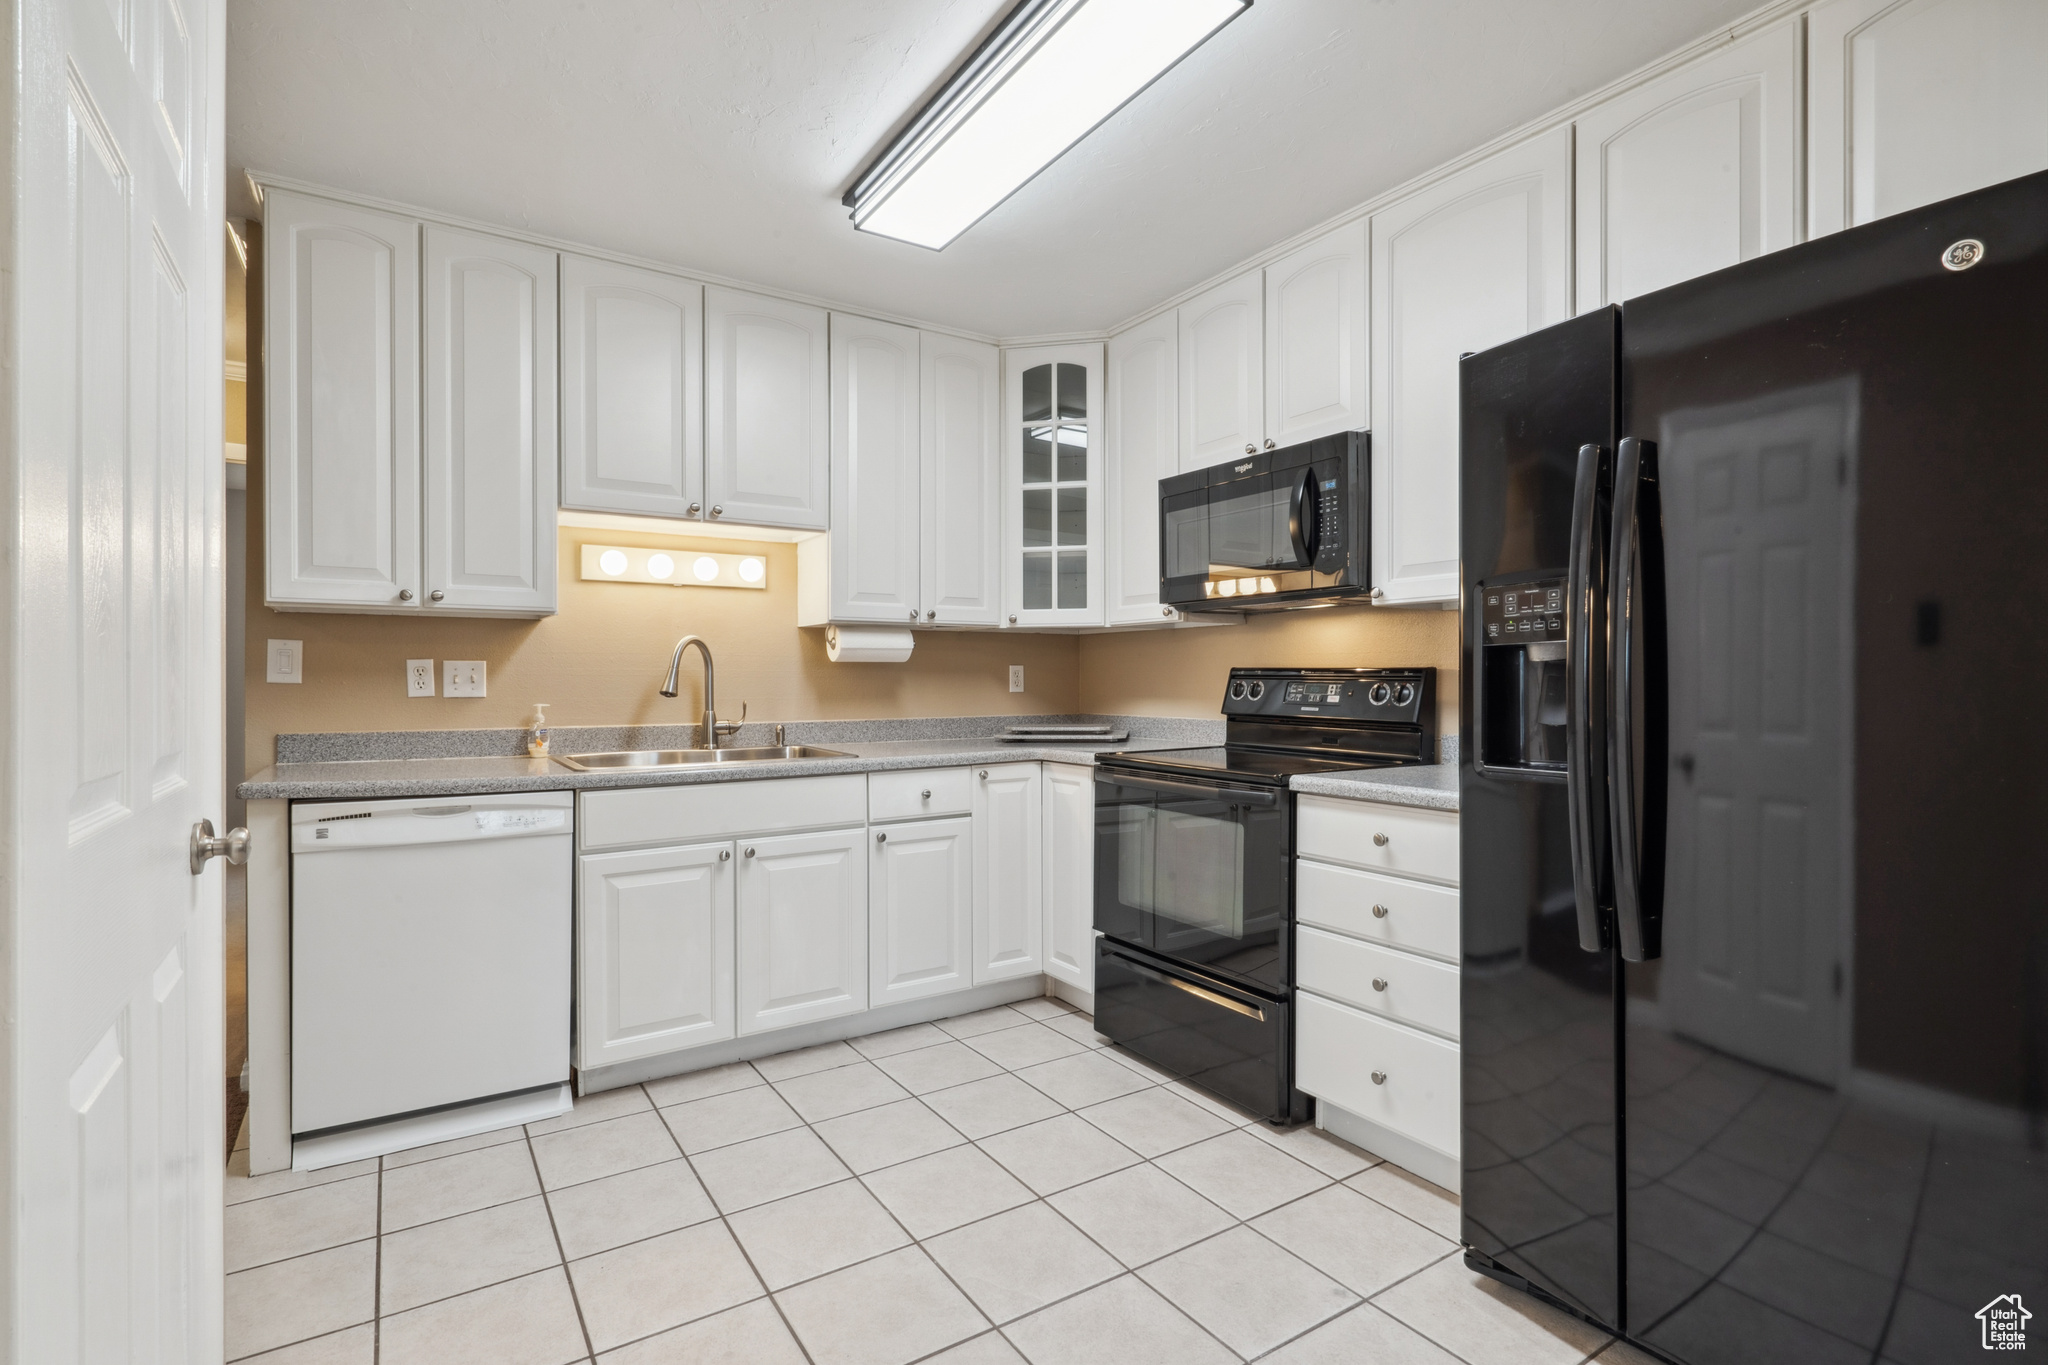 Kitchen featuring white cabinets, sink, light tile flooring, and black appliances